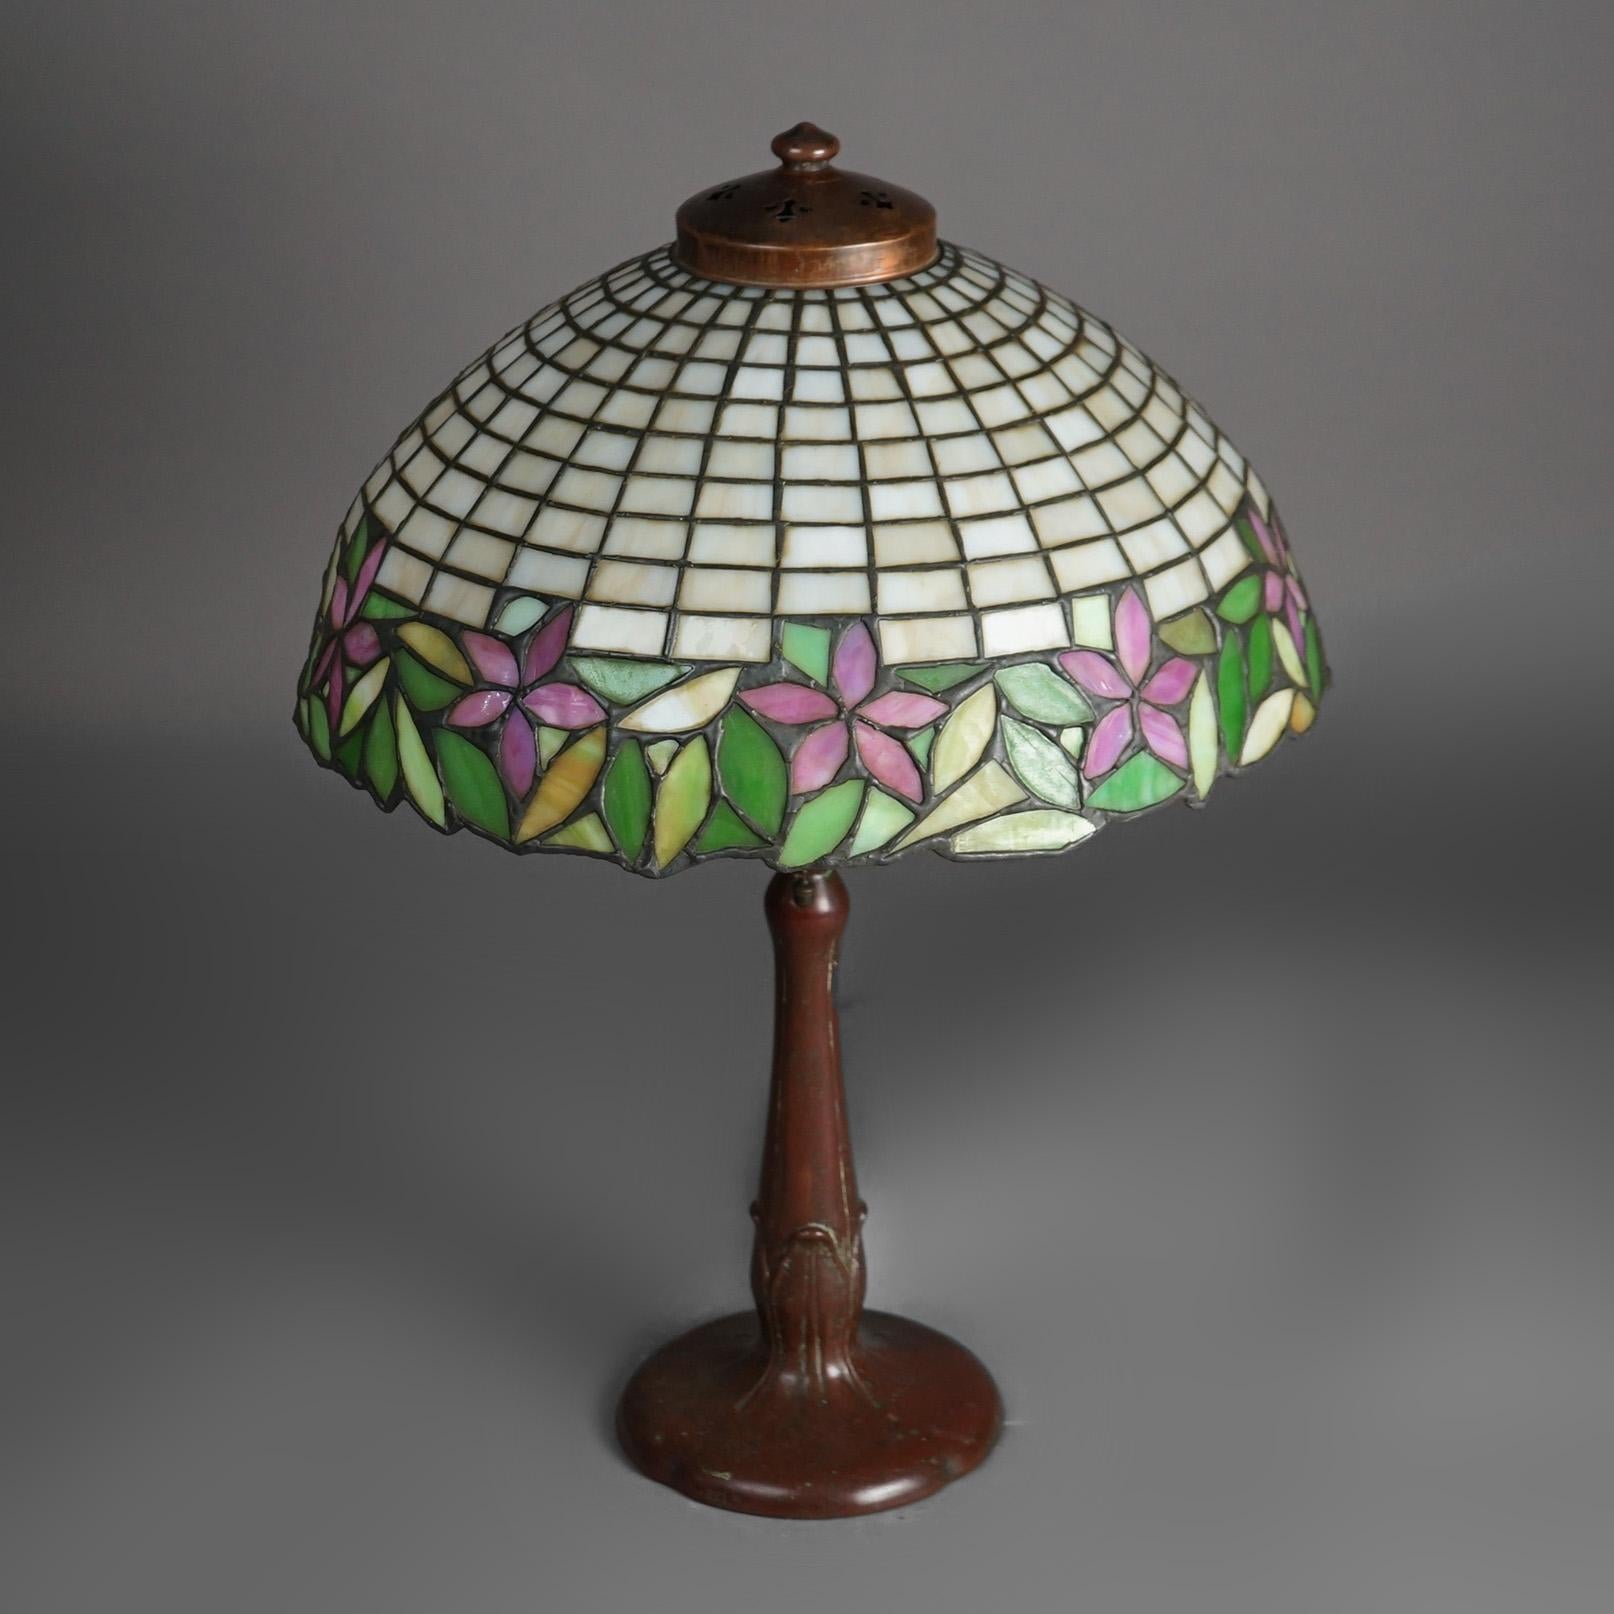 American Antique Arts & Crafts Leaded Glass Lamp With Unique Shade & Handel Base c1920